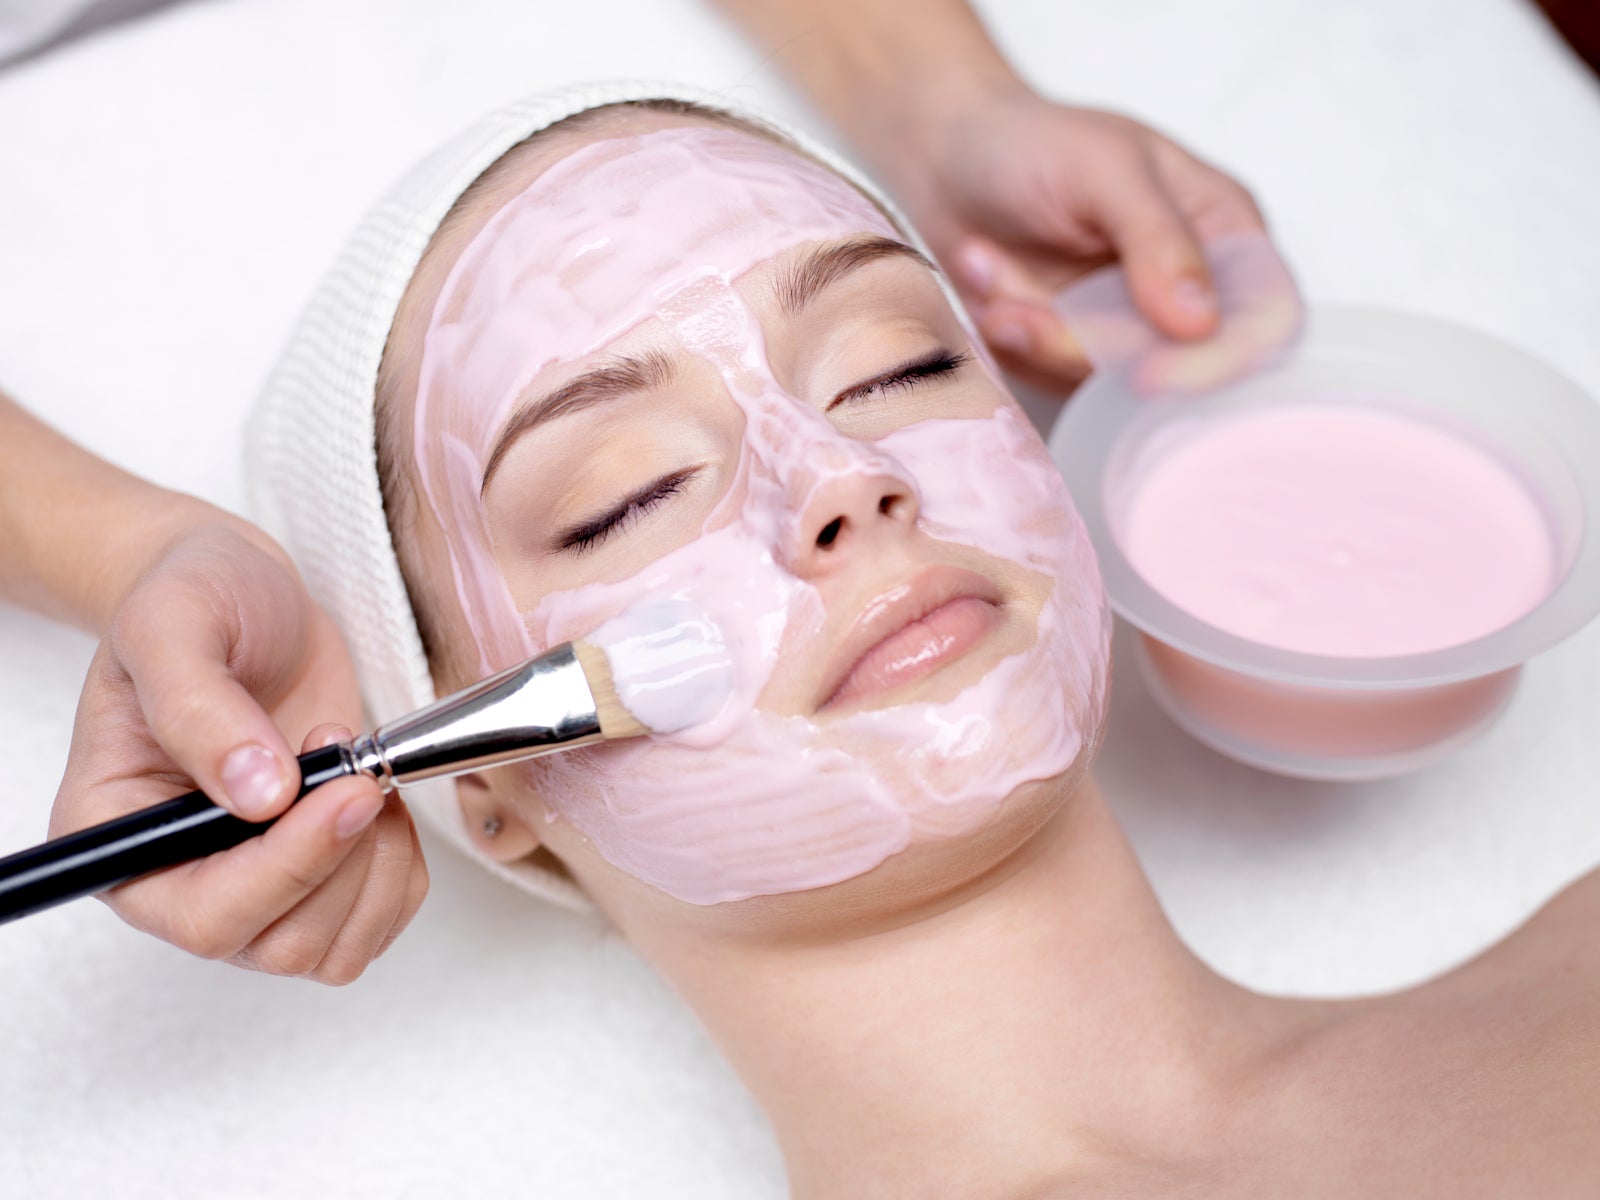 Food face masks DIY beauty facials you can make at home The Independent The Independent photo